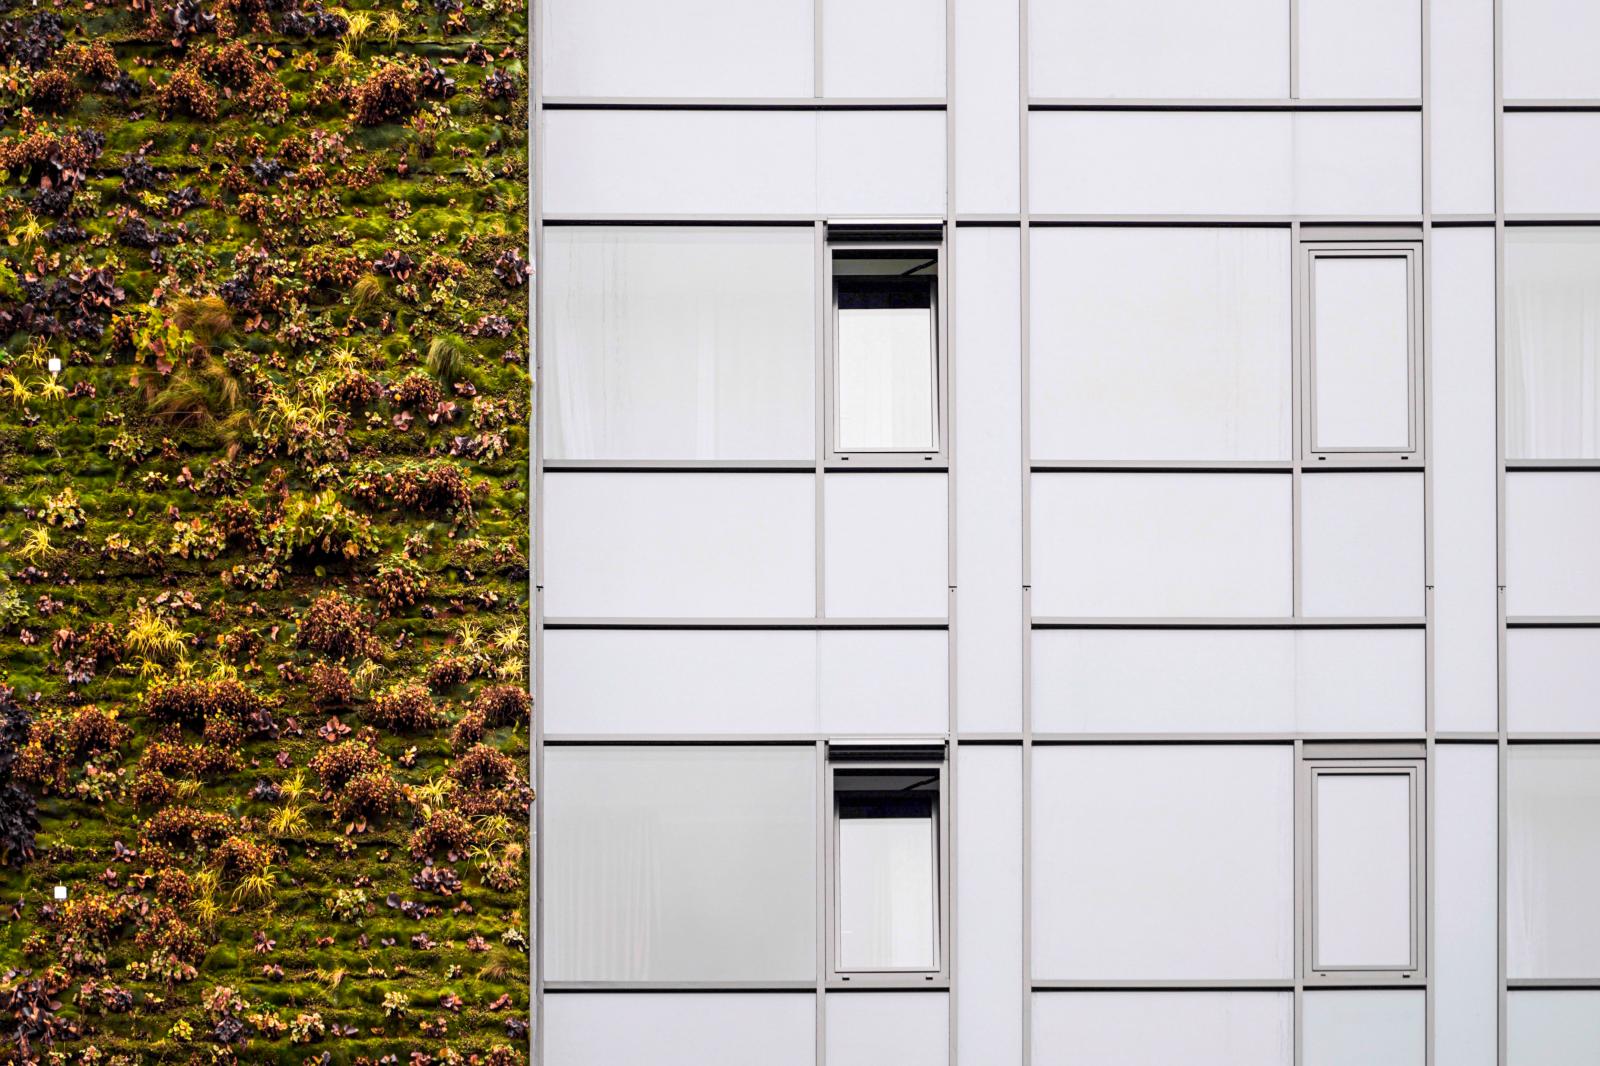 Image from New Photographs -  Koblenz , Germany  # 4108 12/2023 Living Wall: Green...